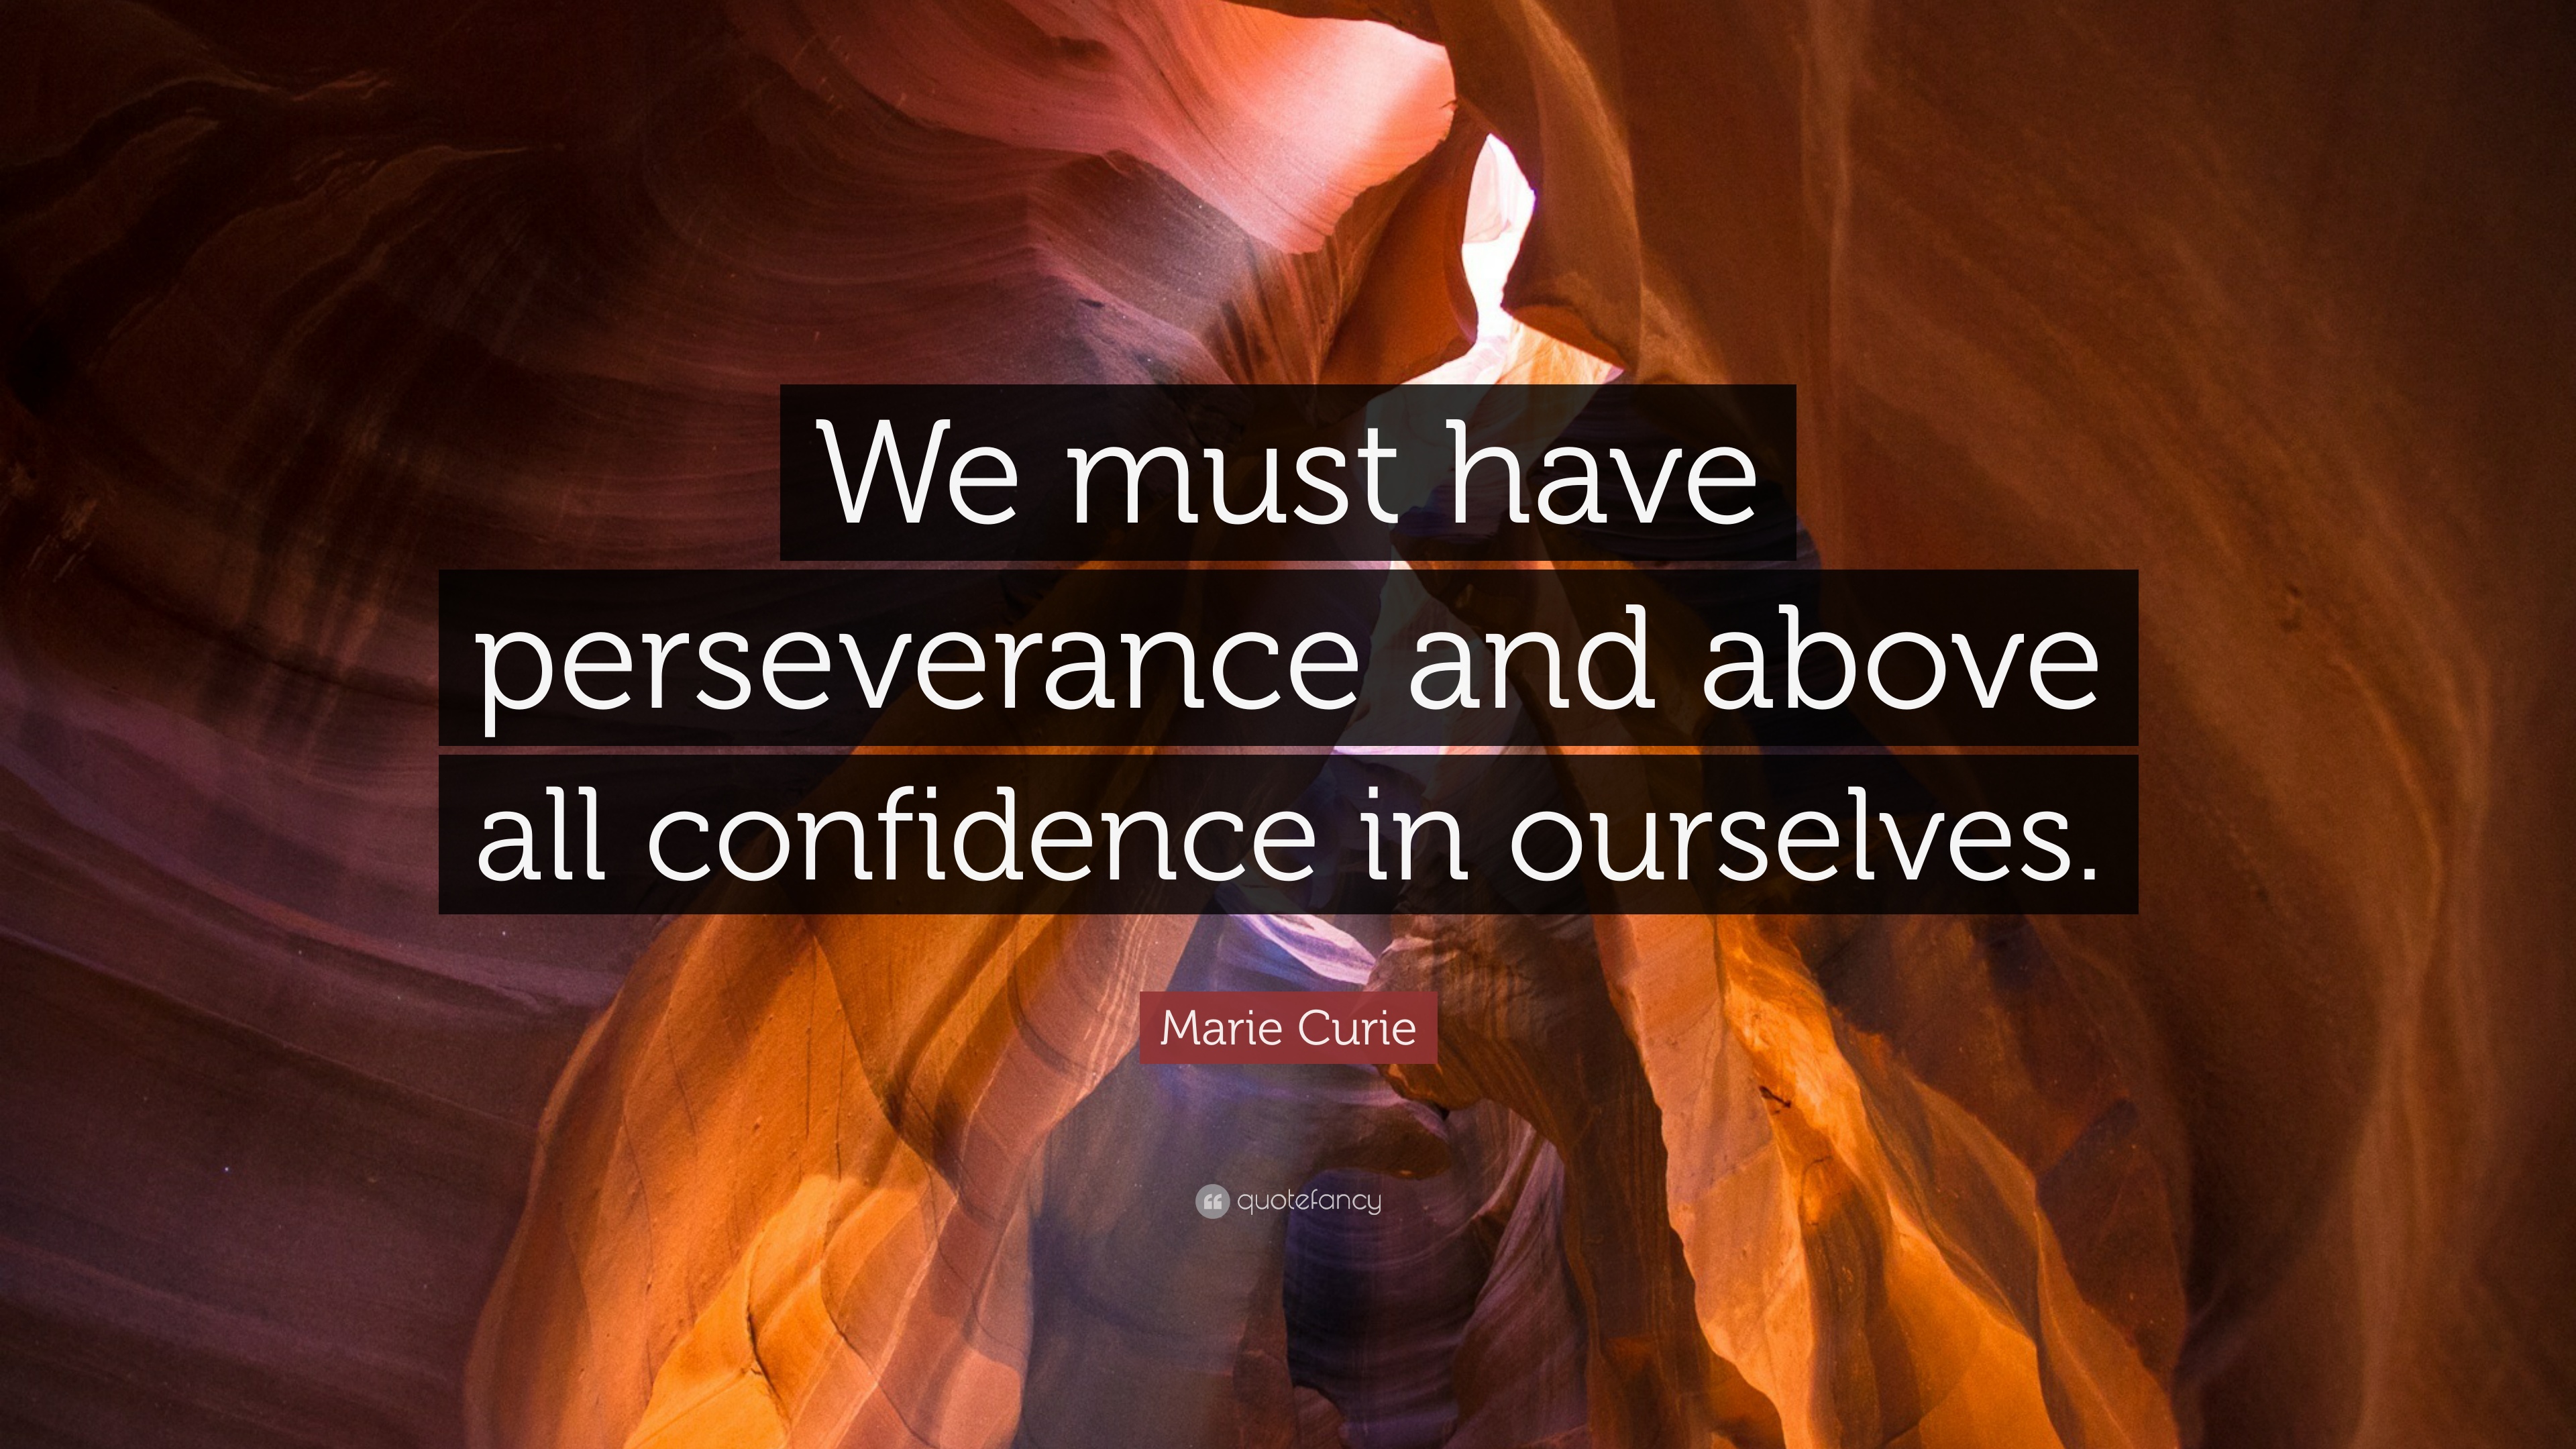 Marie Curie Quote: “We must have perseverance and above all